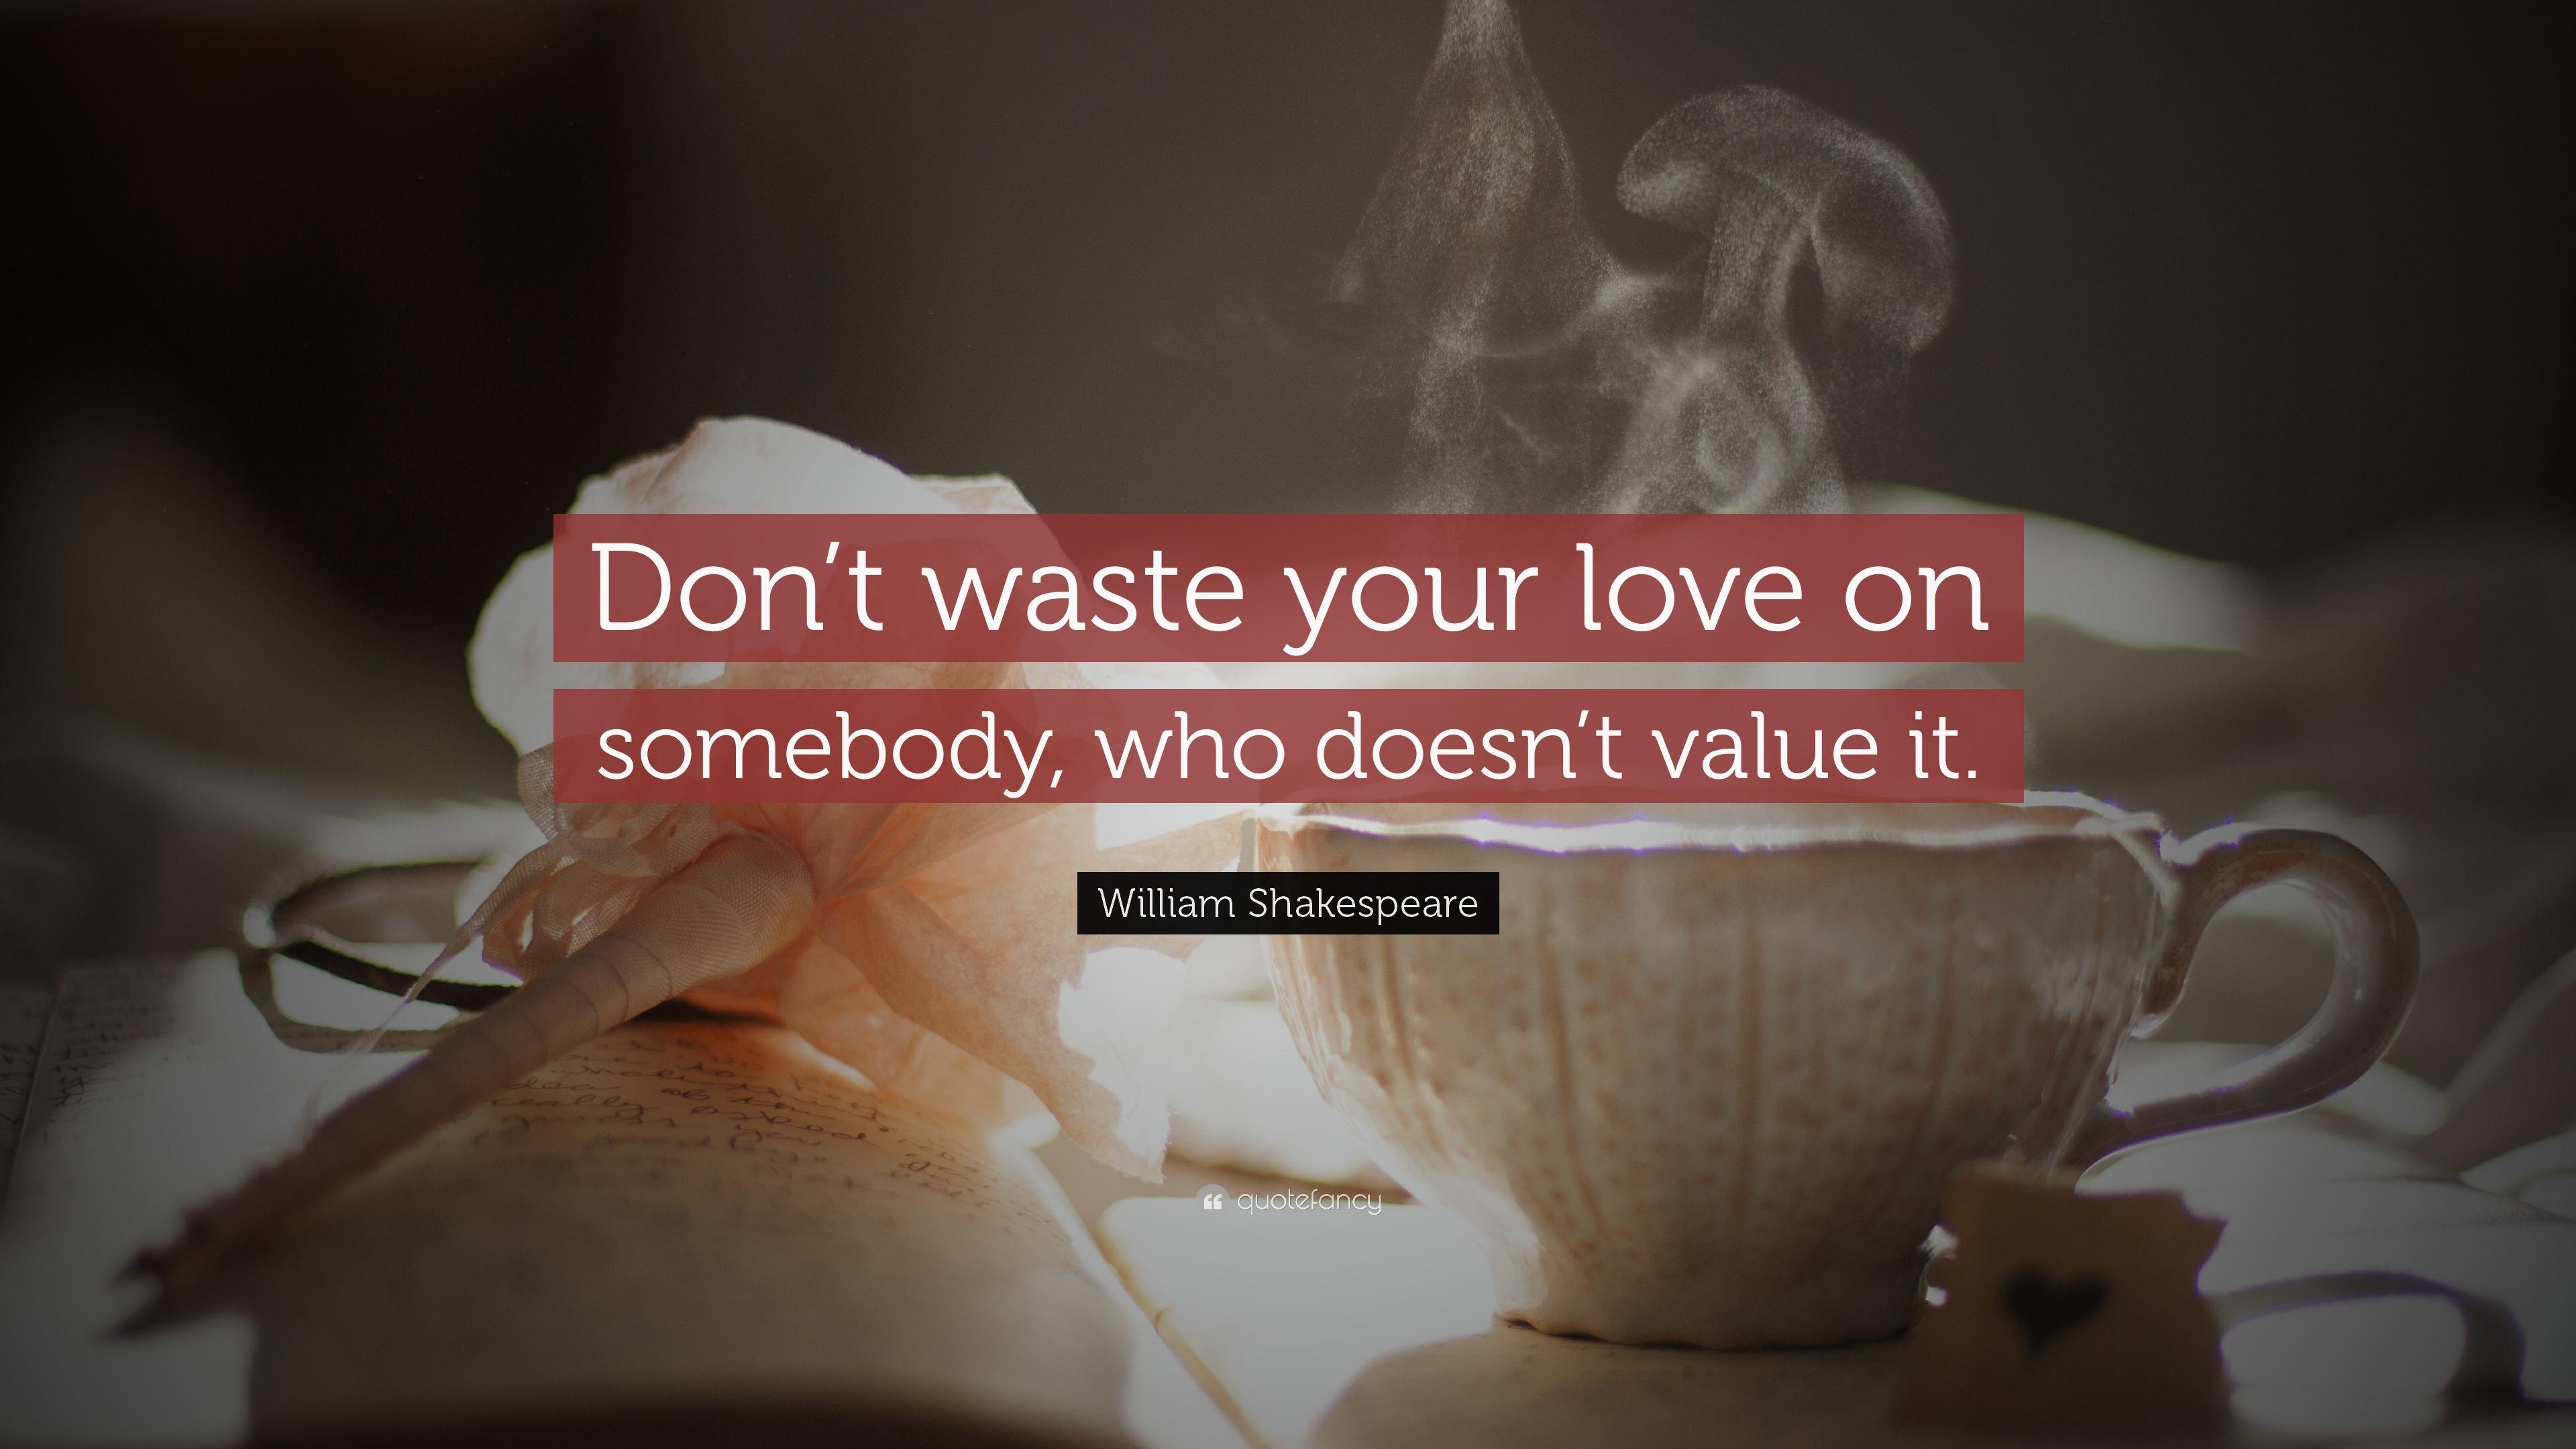 William Shakespeare Quote: “Don't waste your love on somebody, who